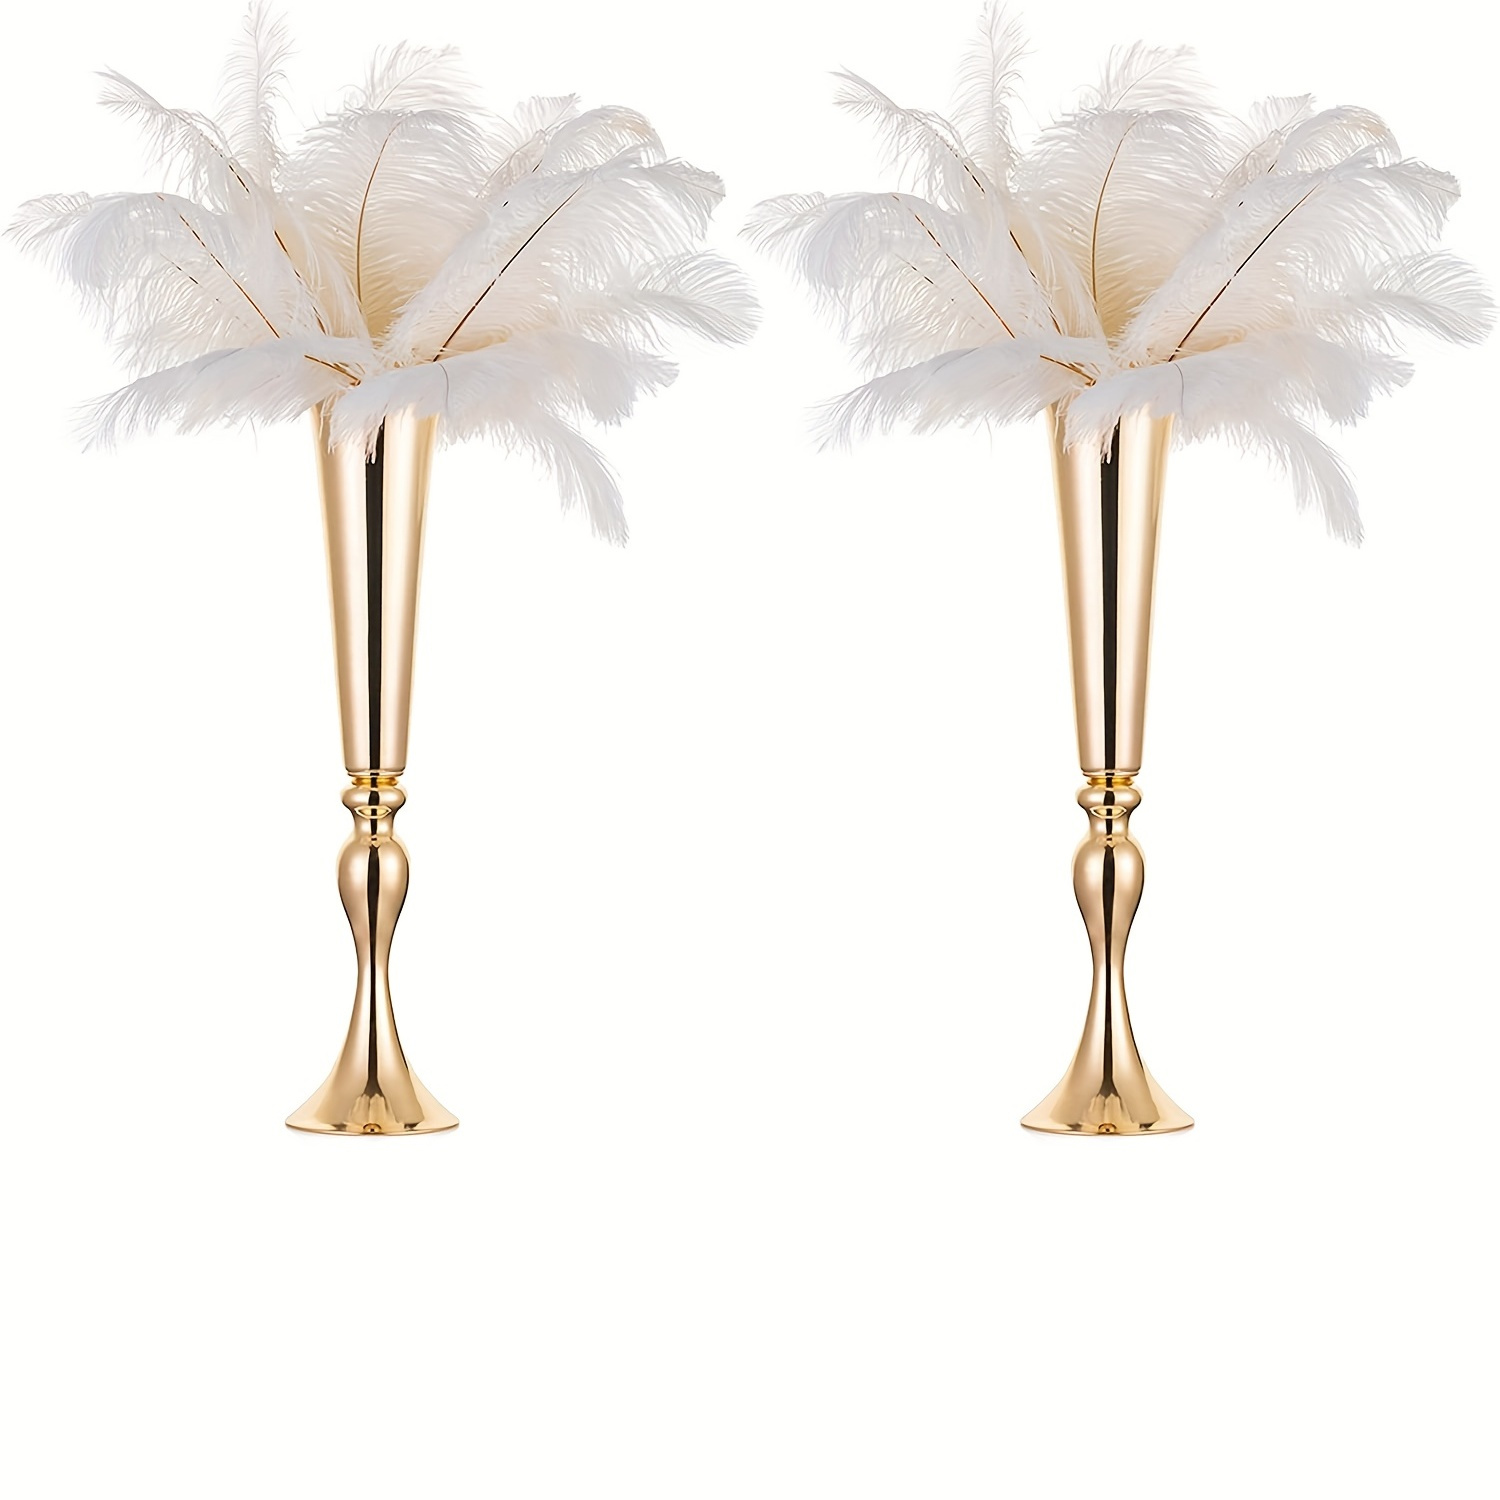 

2pcs Height Versatile Metal Wedding Centerpieces Vase - Perfect For Any Event Or Festival Decoration!